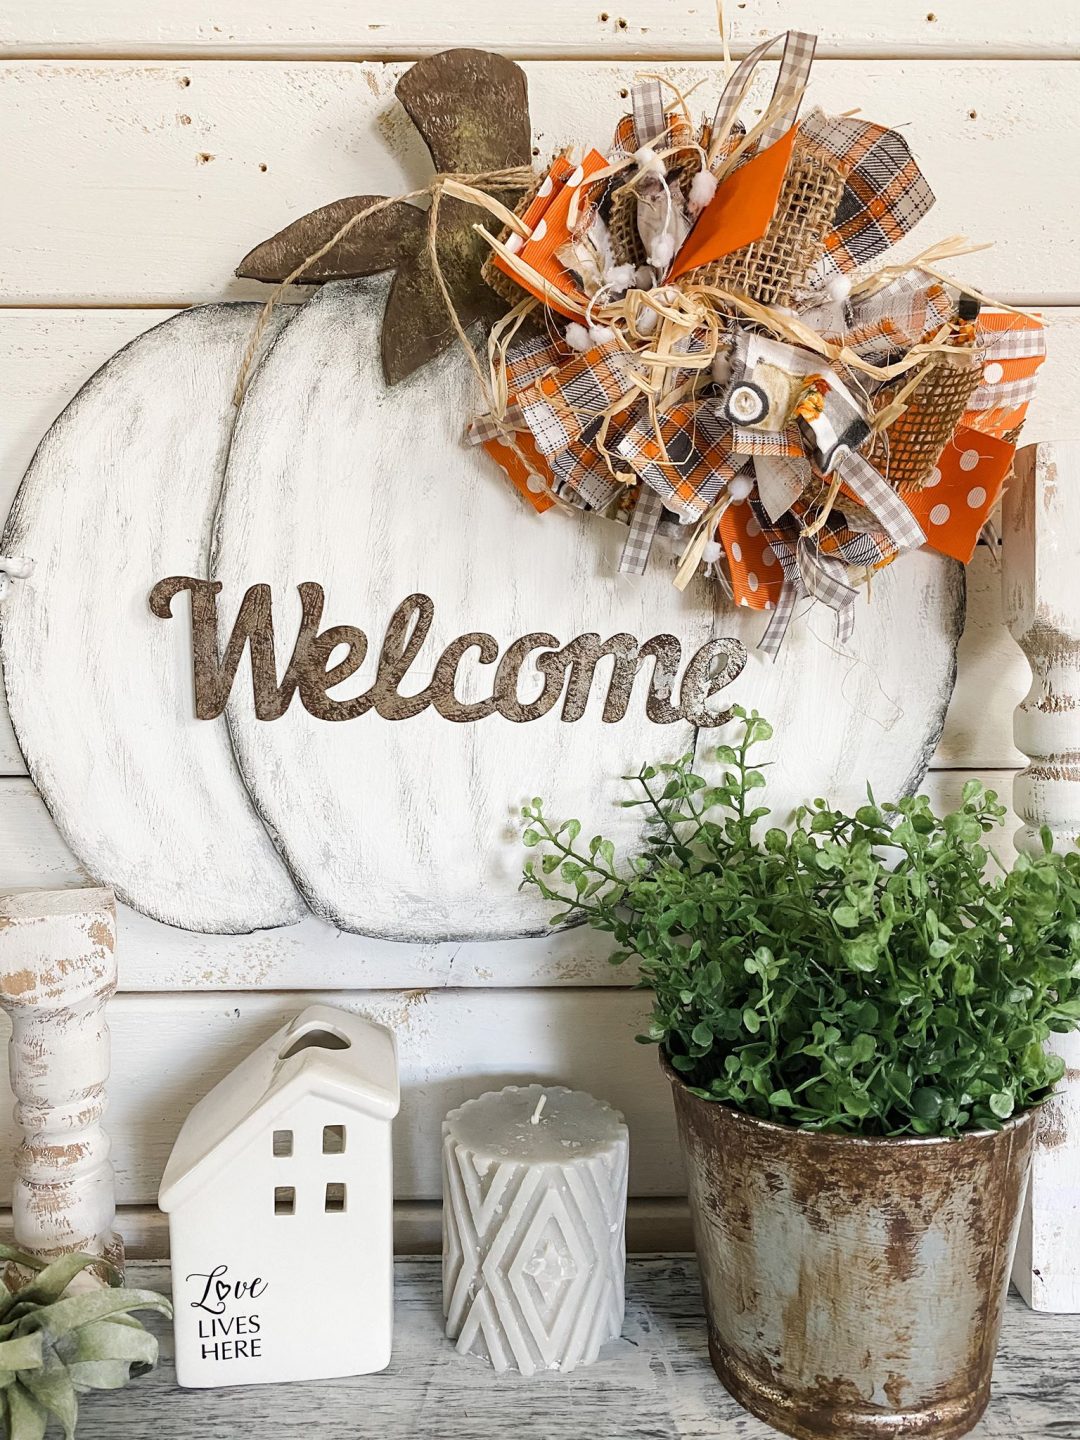 Discover the charm of fall door hangers with ideas for autumn wreaths, fall door decor, and more. Transform your home with these DIY autumn door hangers.